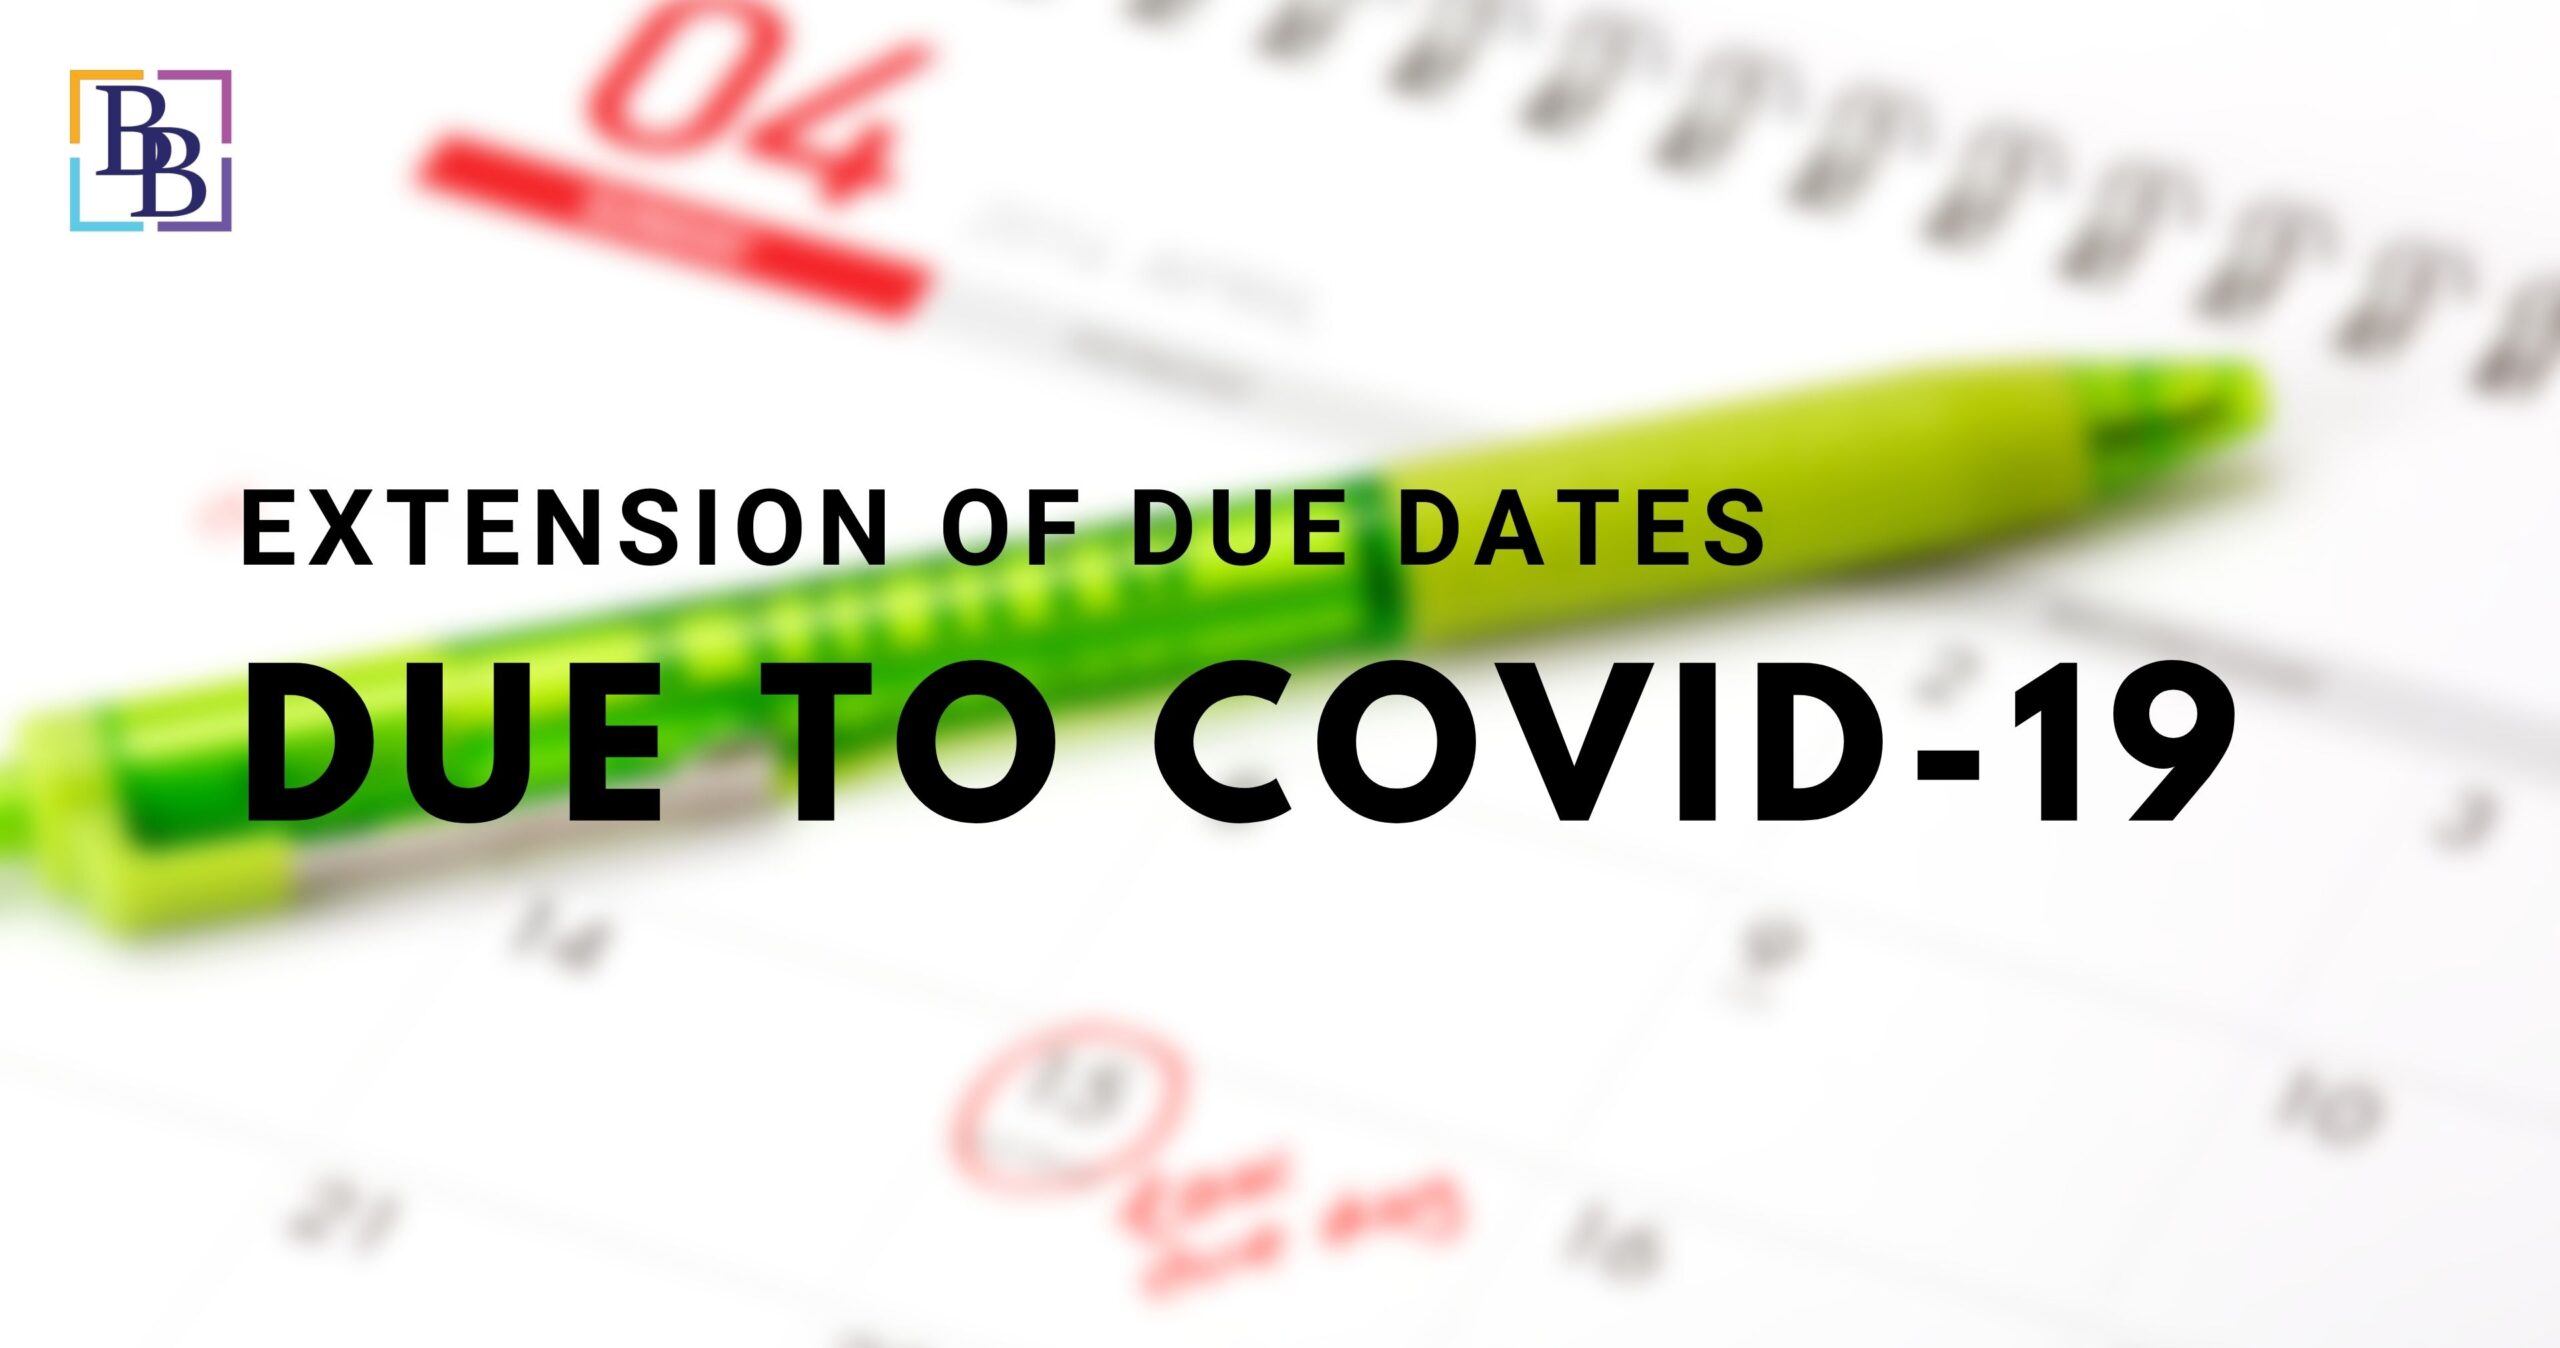 Extension of due dates due to Covid 19 pandemic